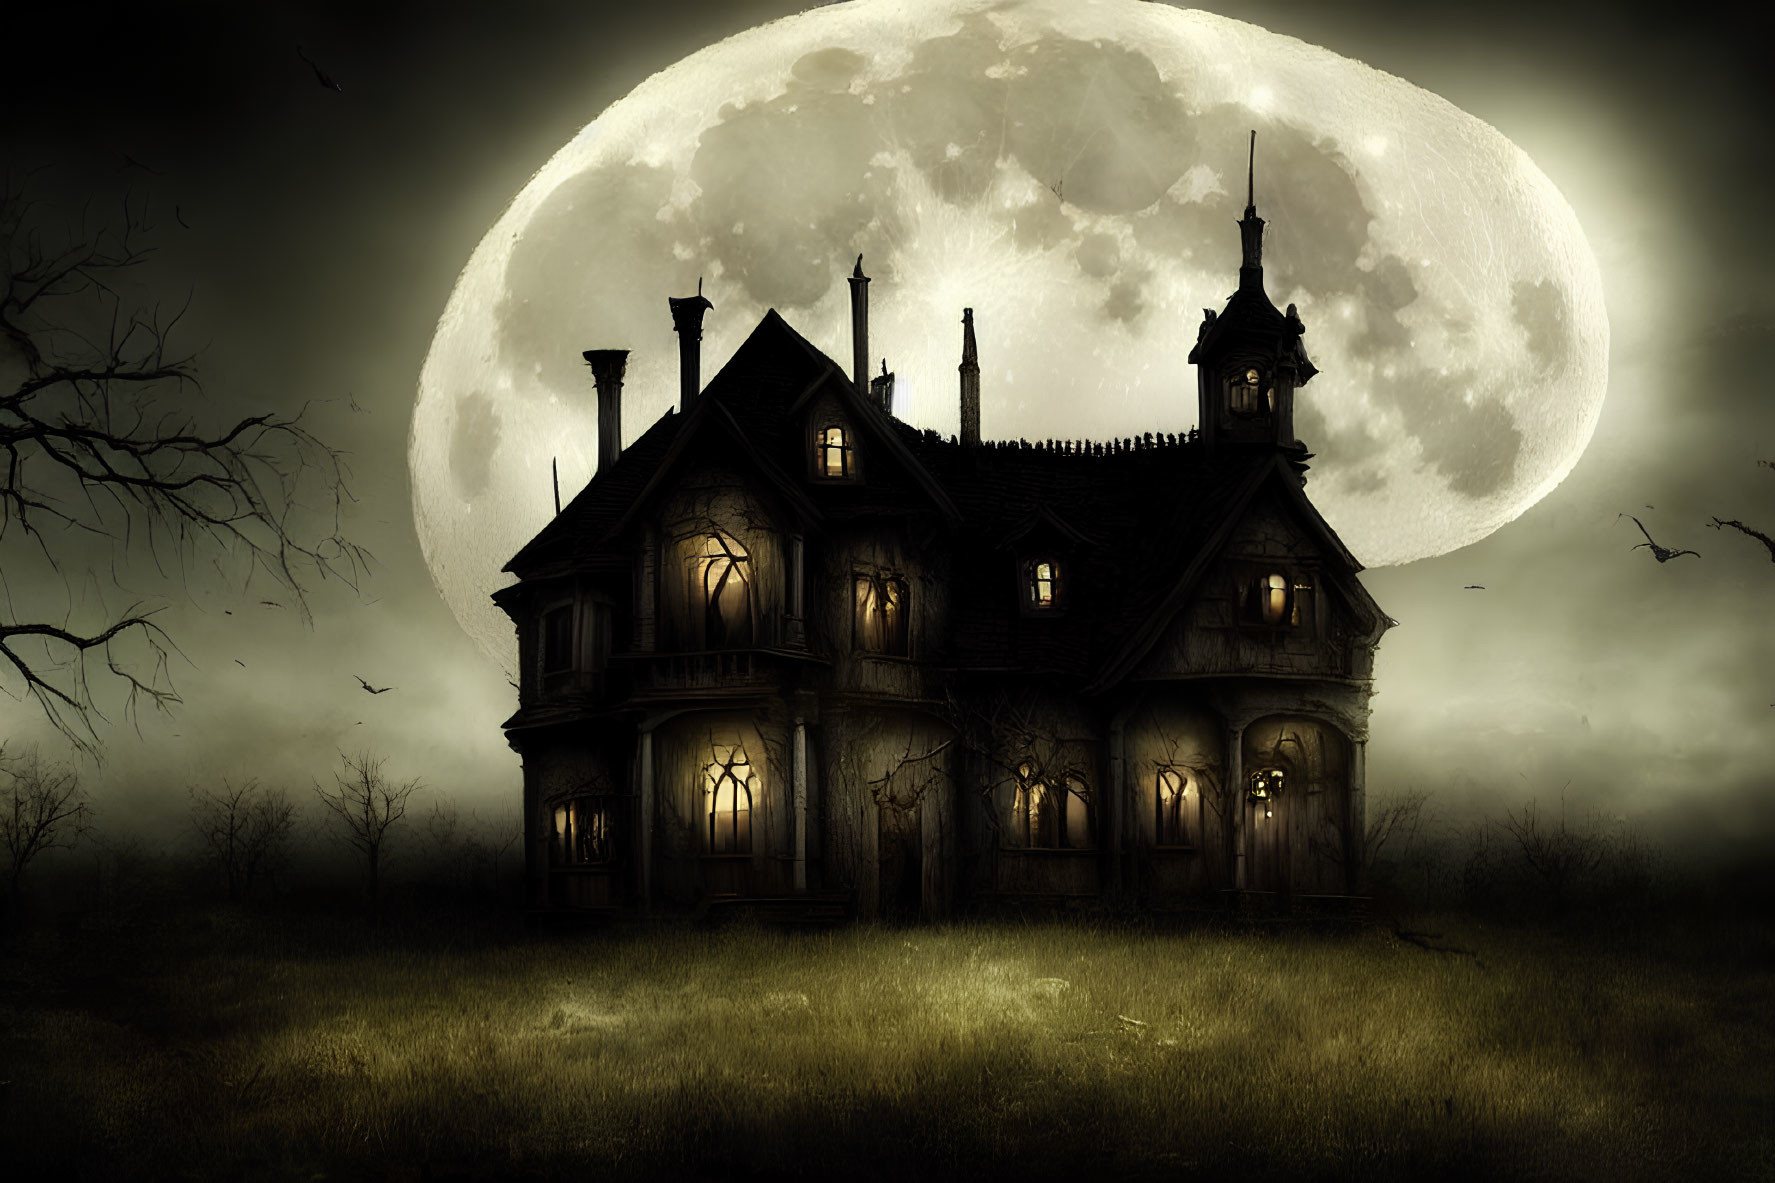 Victorian mansion under full moon with bats, eerie lighting, and barren tree